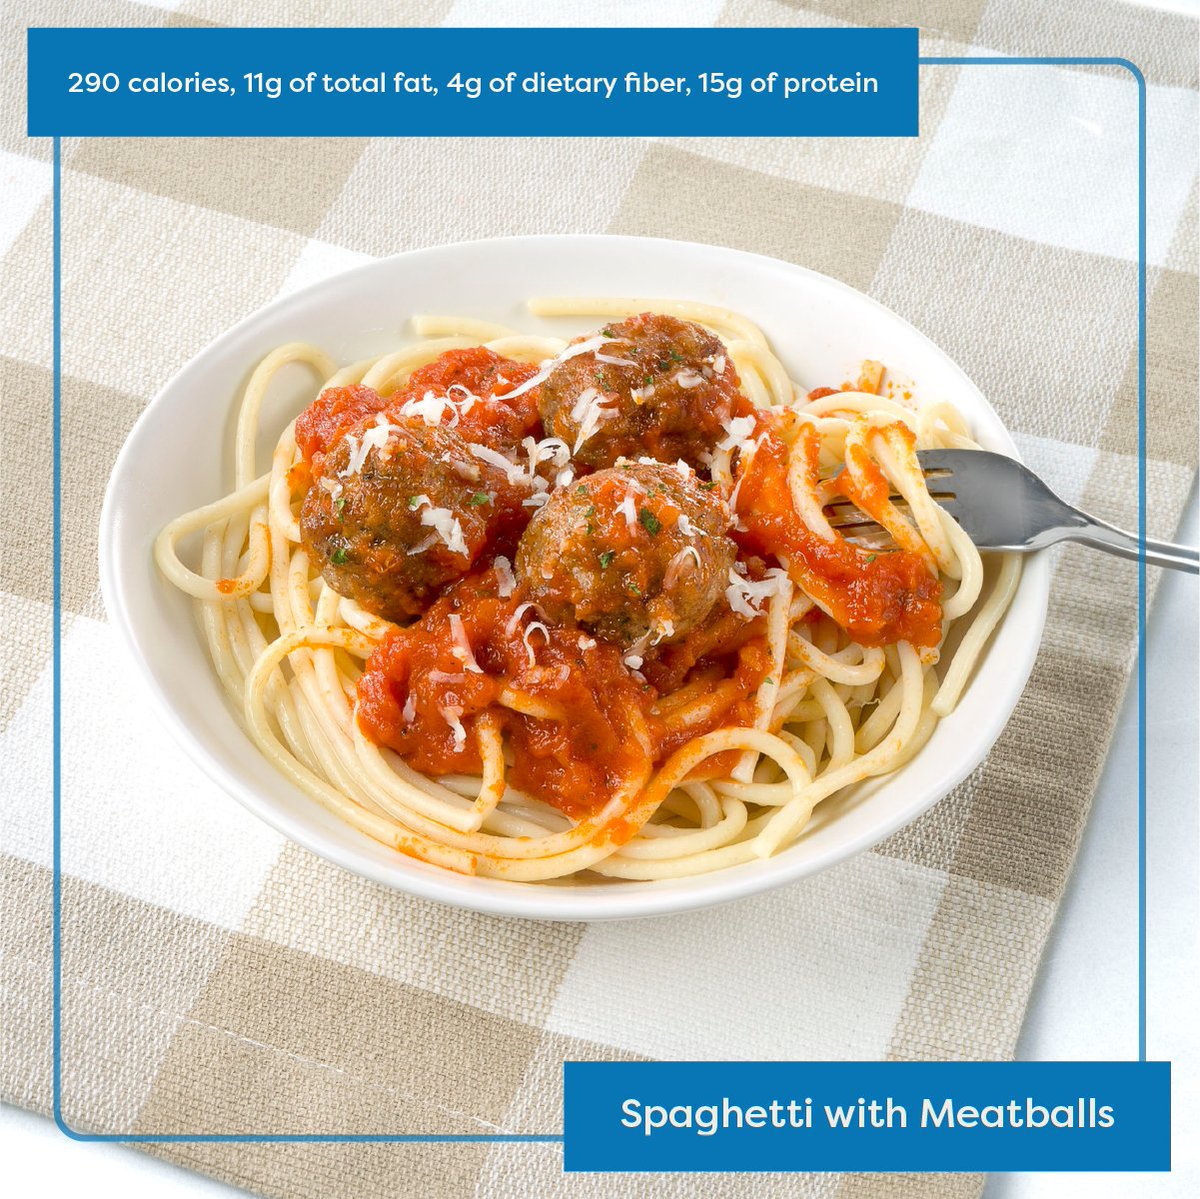 Pasta? Yes, please! Savor the delicious flavors of Spaghetti with Meatballs while still losing weight! 🍝